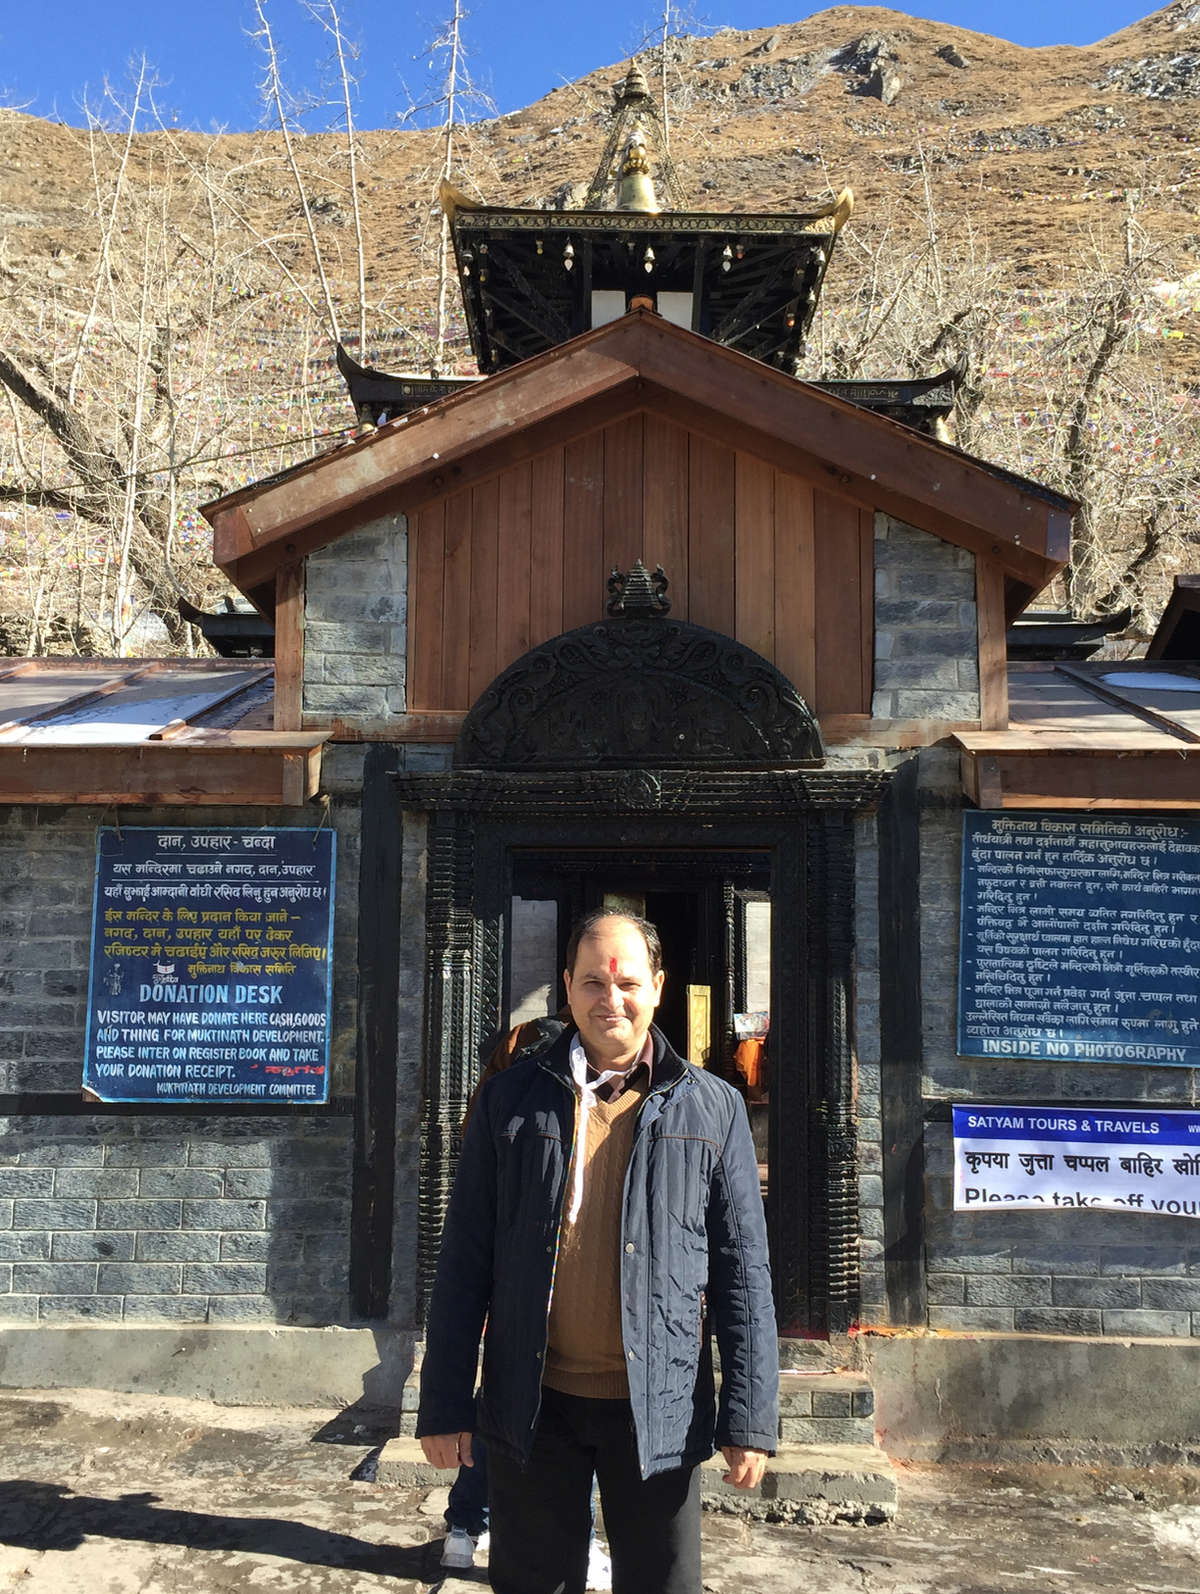 The highly regarded temple (Muktinath) is situated at an altitude of 3800 meters.